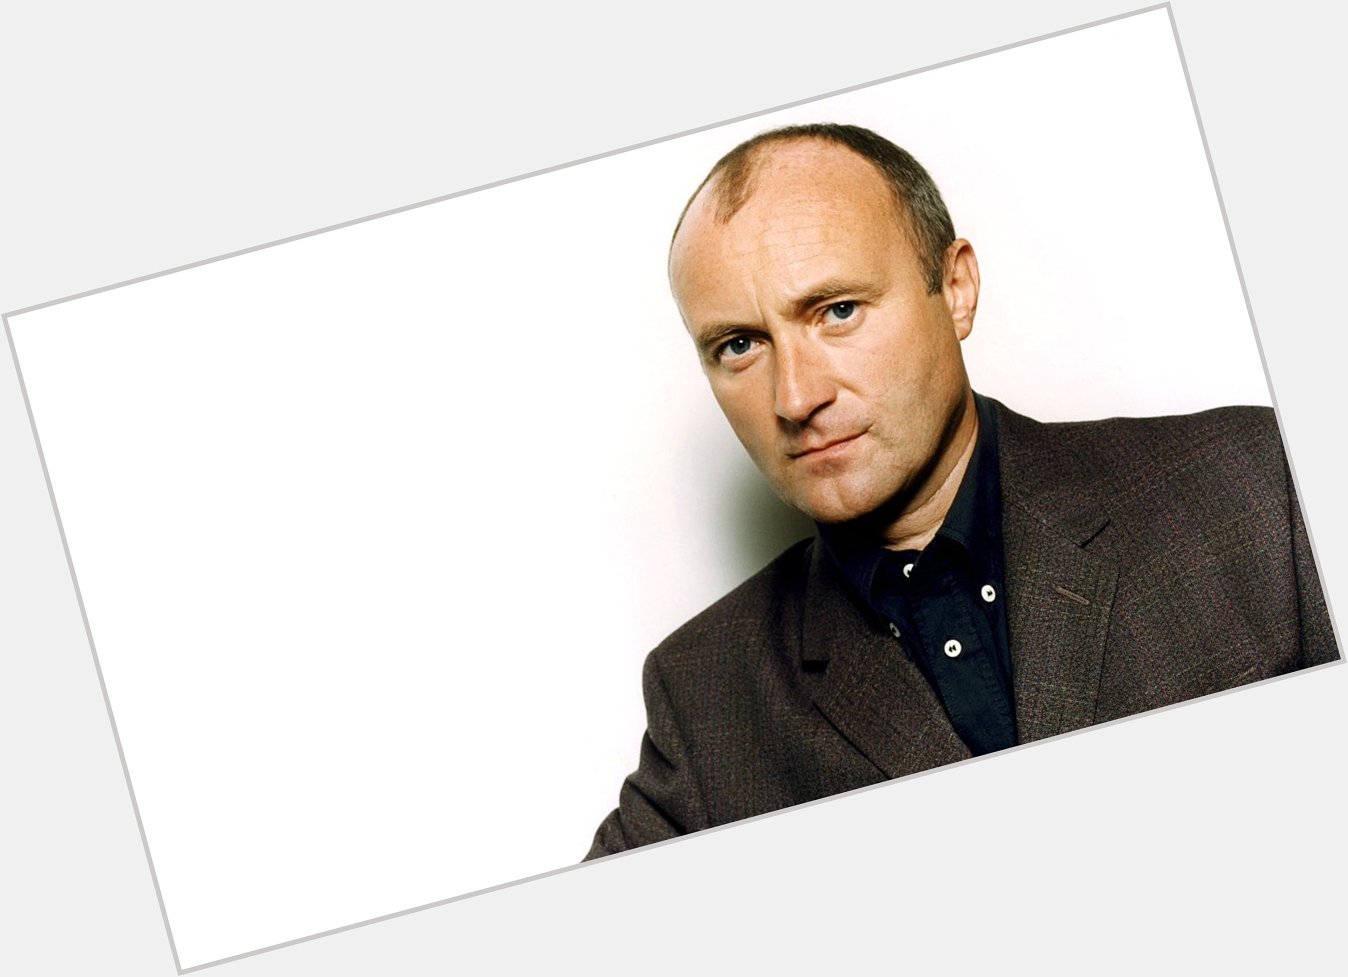  Happy Birthday to drummer, singer, songwriter and former member of Genesis Phil Collins! 